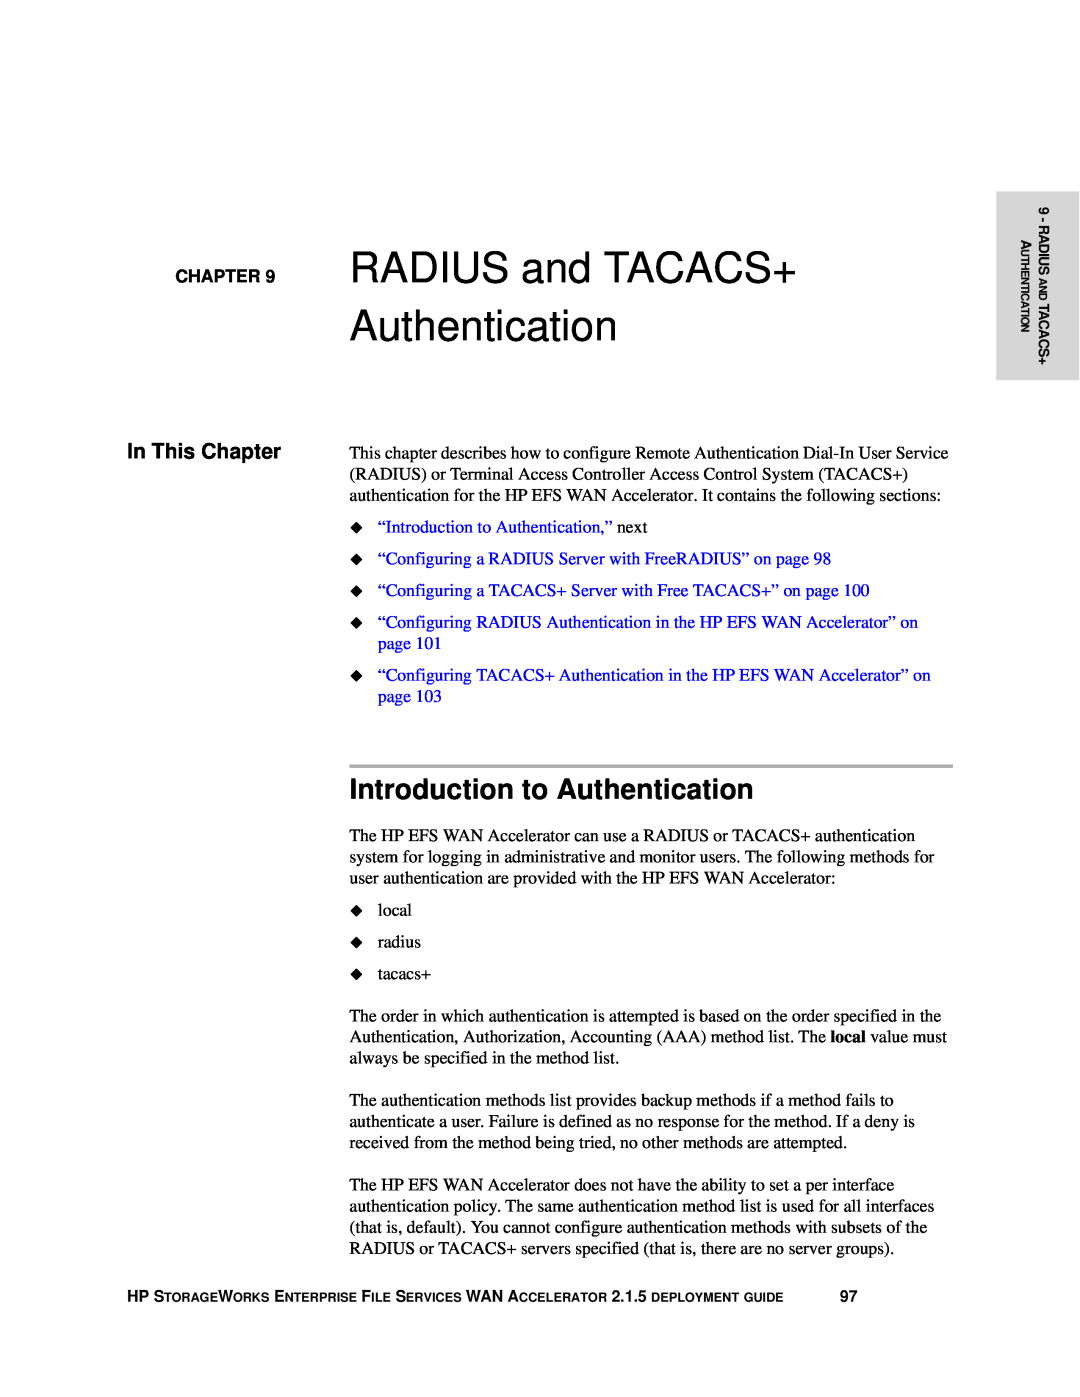 HP Enterprise File Services WAN Accelerator manual RADIUS and TACACS+ Authentication, Introduction to Authentication, page 